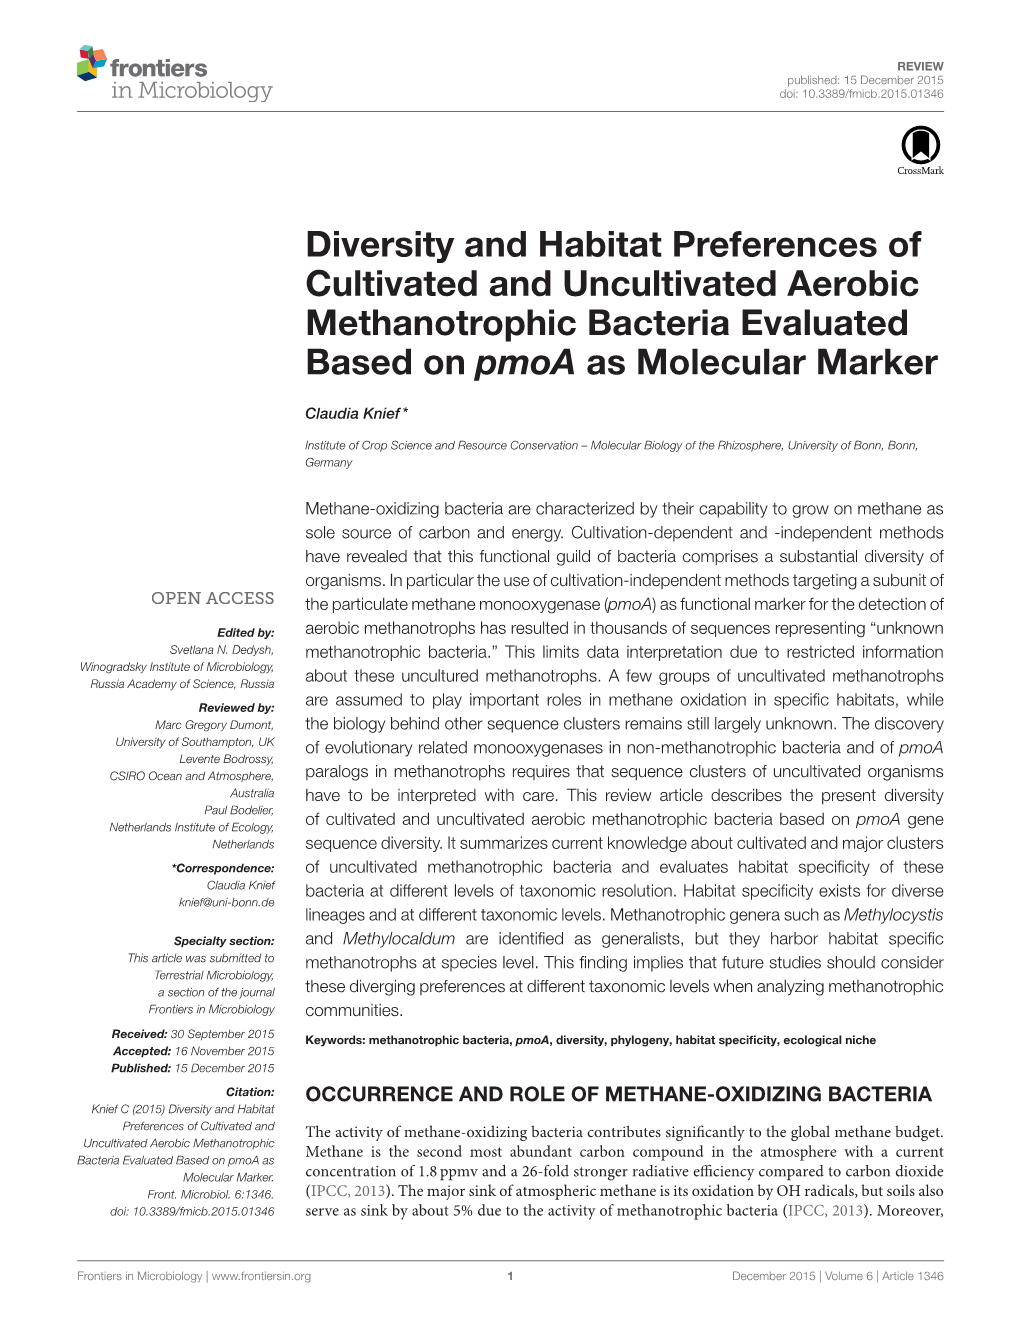 Diversity and Habitat Preferences of Cultivated and Uncultivated Aerobic Methanotrophic Bacteria Evaluated Based on Pmoa As Molecular Marker